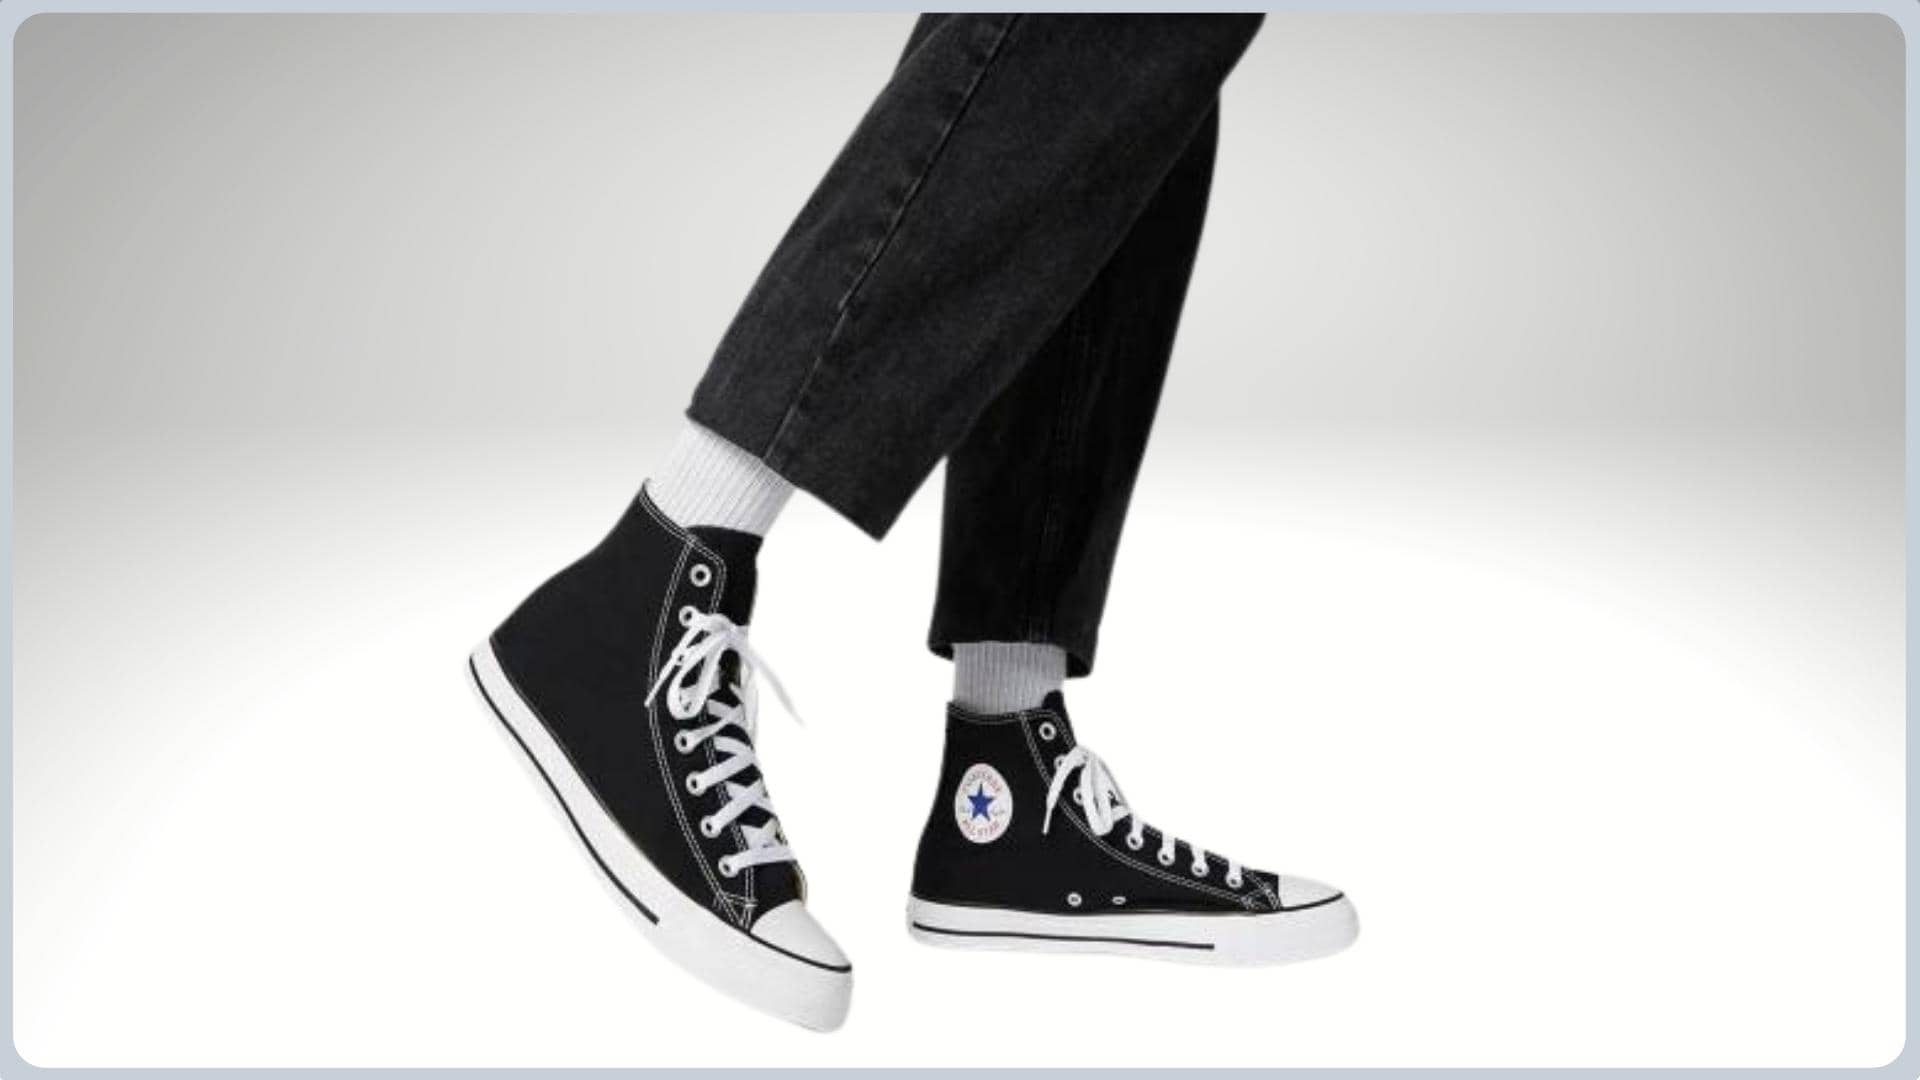 Are Converse Business Casual? (Quick Facts)